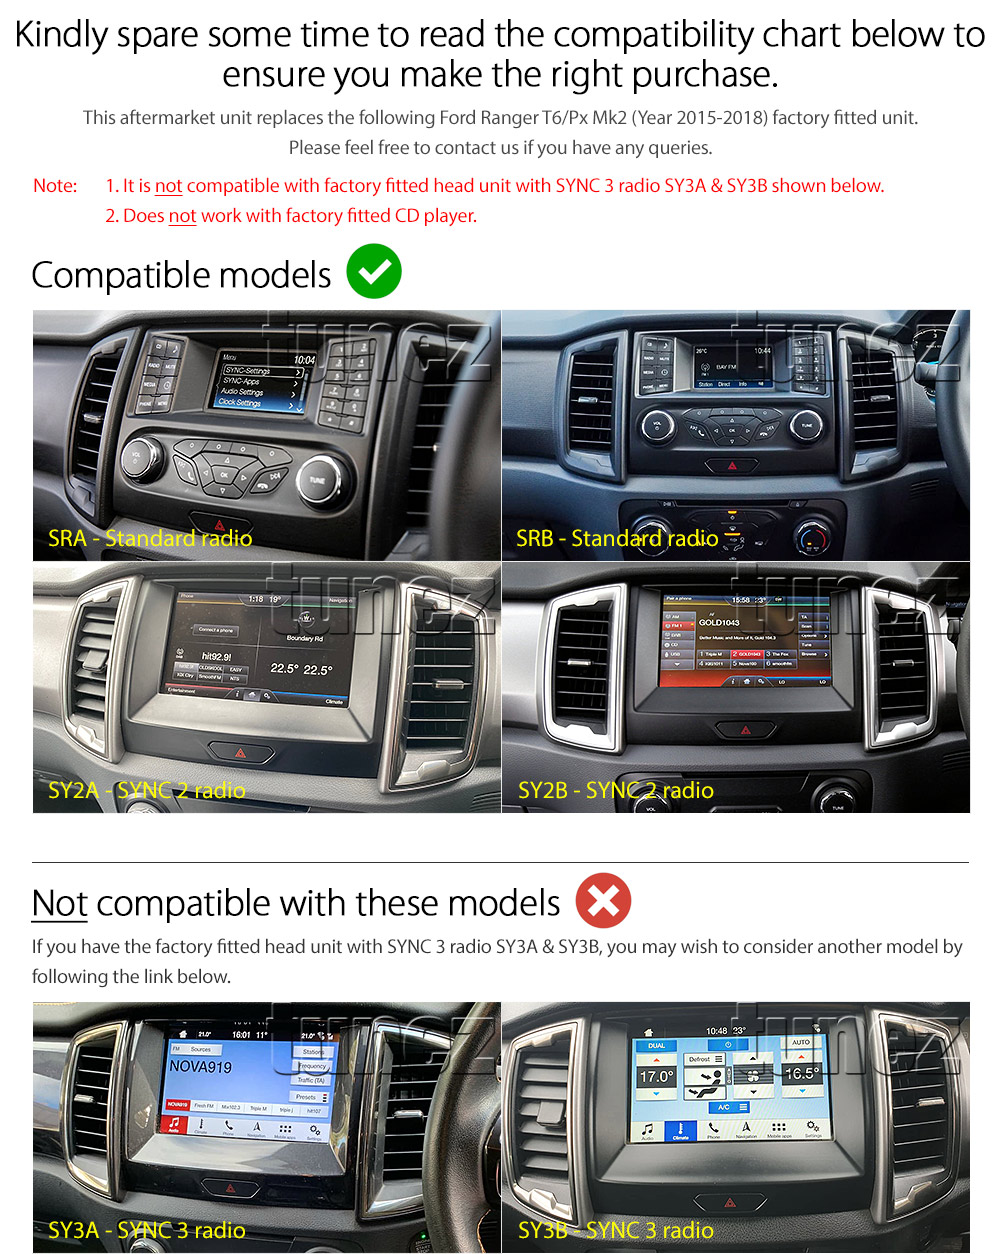 SRRFRT601AND GPS Aftermarket Ford Ranger T6 PX Mk2 Mk3 Year 2015 2016 2017 2018 2019 large 9-inch 9' touchscreen Universal Double DIN Latest Australia UK European USA Original CarPlay Android Auto 10 Car USB player radio stereo 4G LTE WiFi head unit details Aftermarket External and Internal Microphone Bluetooth Europe Sat Nav Navi Plug and Play ISO Plug Wiring Harness Matching Fascia Kit Facia Free Reversing Camera Album Art ID3 Tag RMVB MP3 MP4 AVI MKV Full High Definition FHD MyLink My Link 1080p DAB+ Digital Radio DAB + Connects2